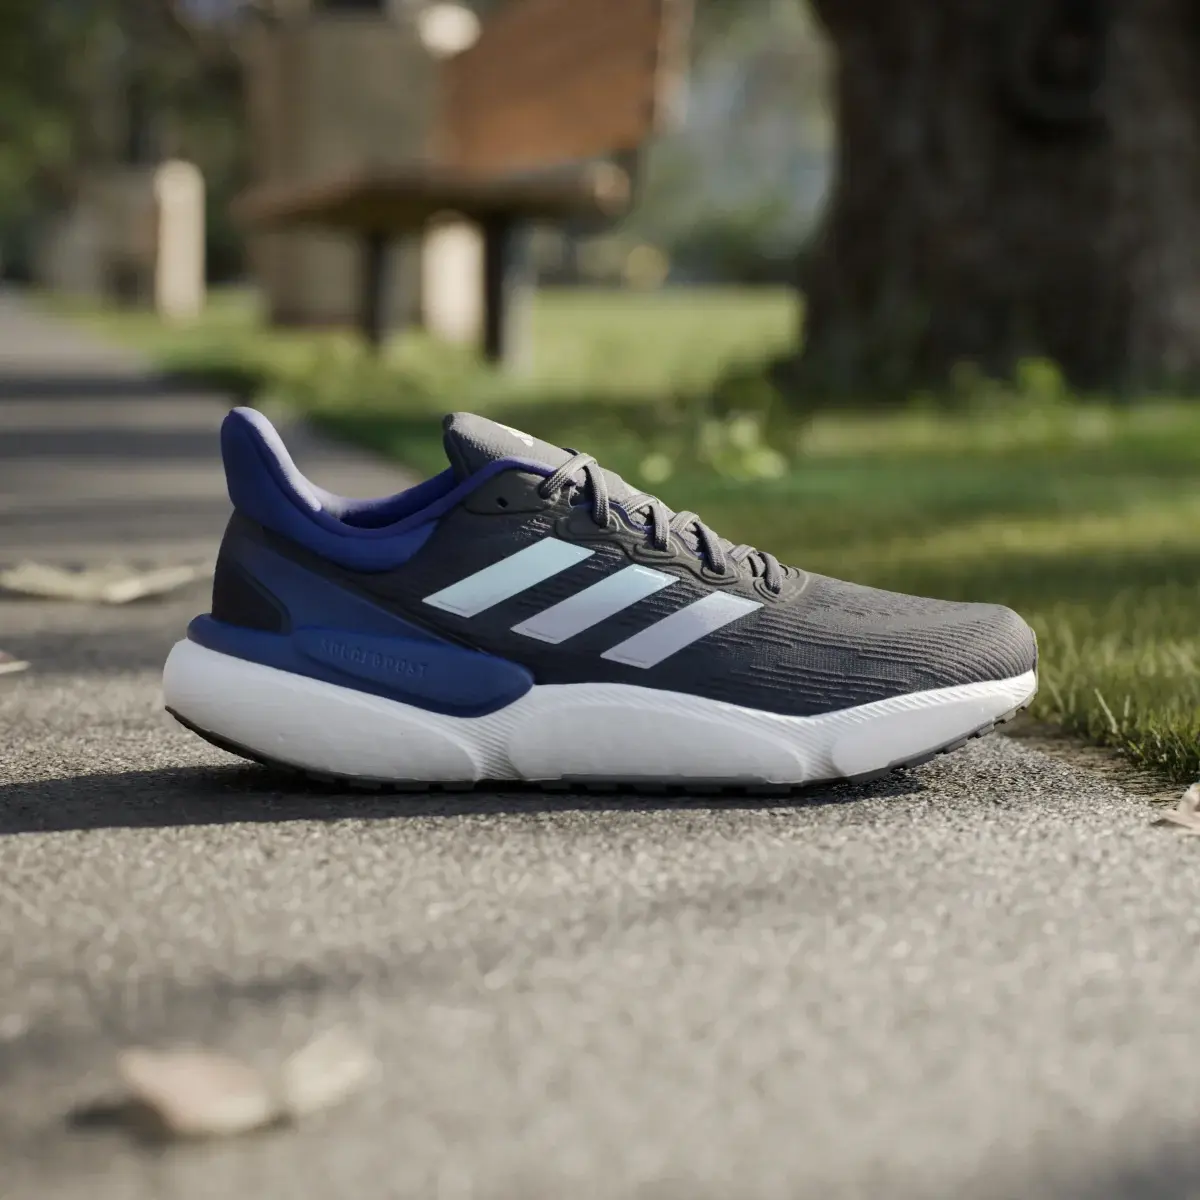 Adidas Solarboost 5 Shoes. 2